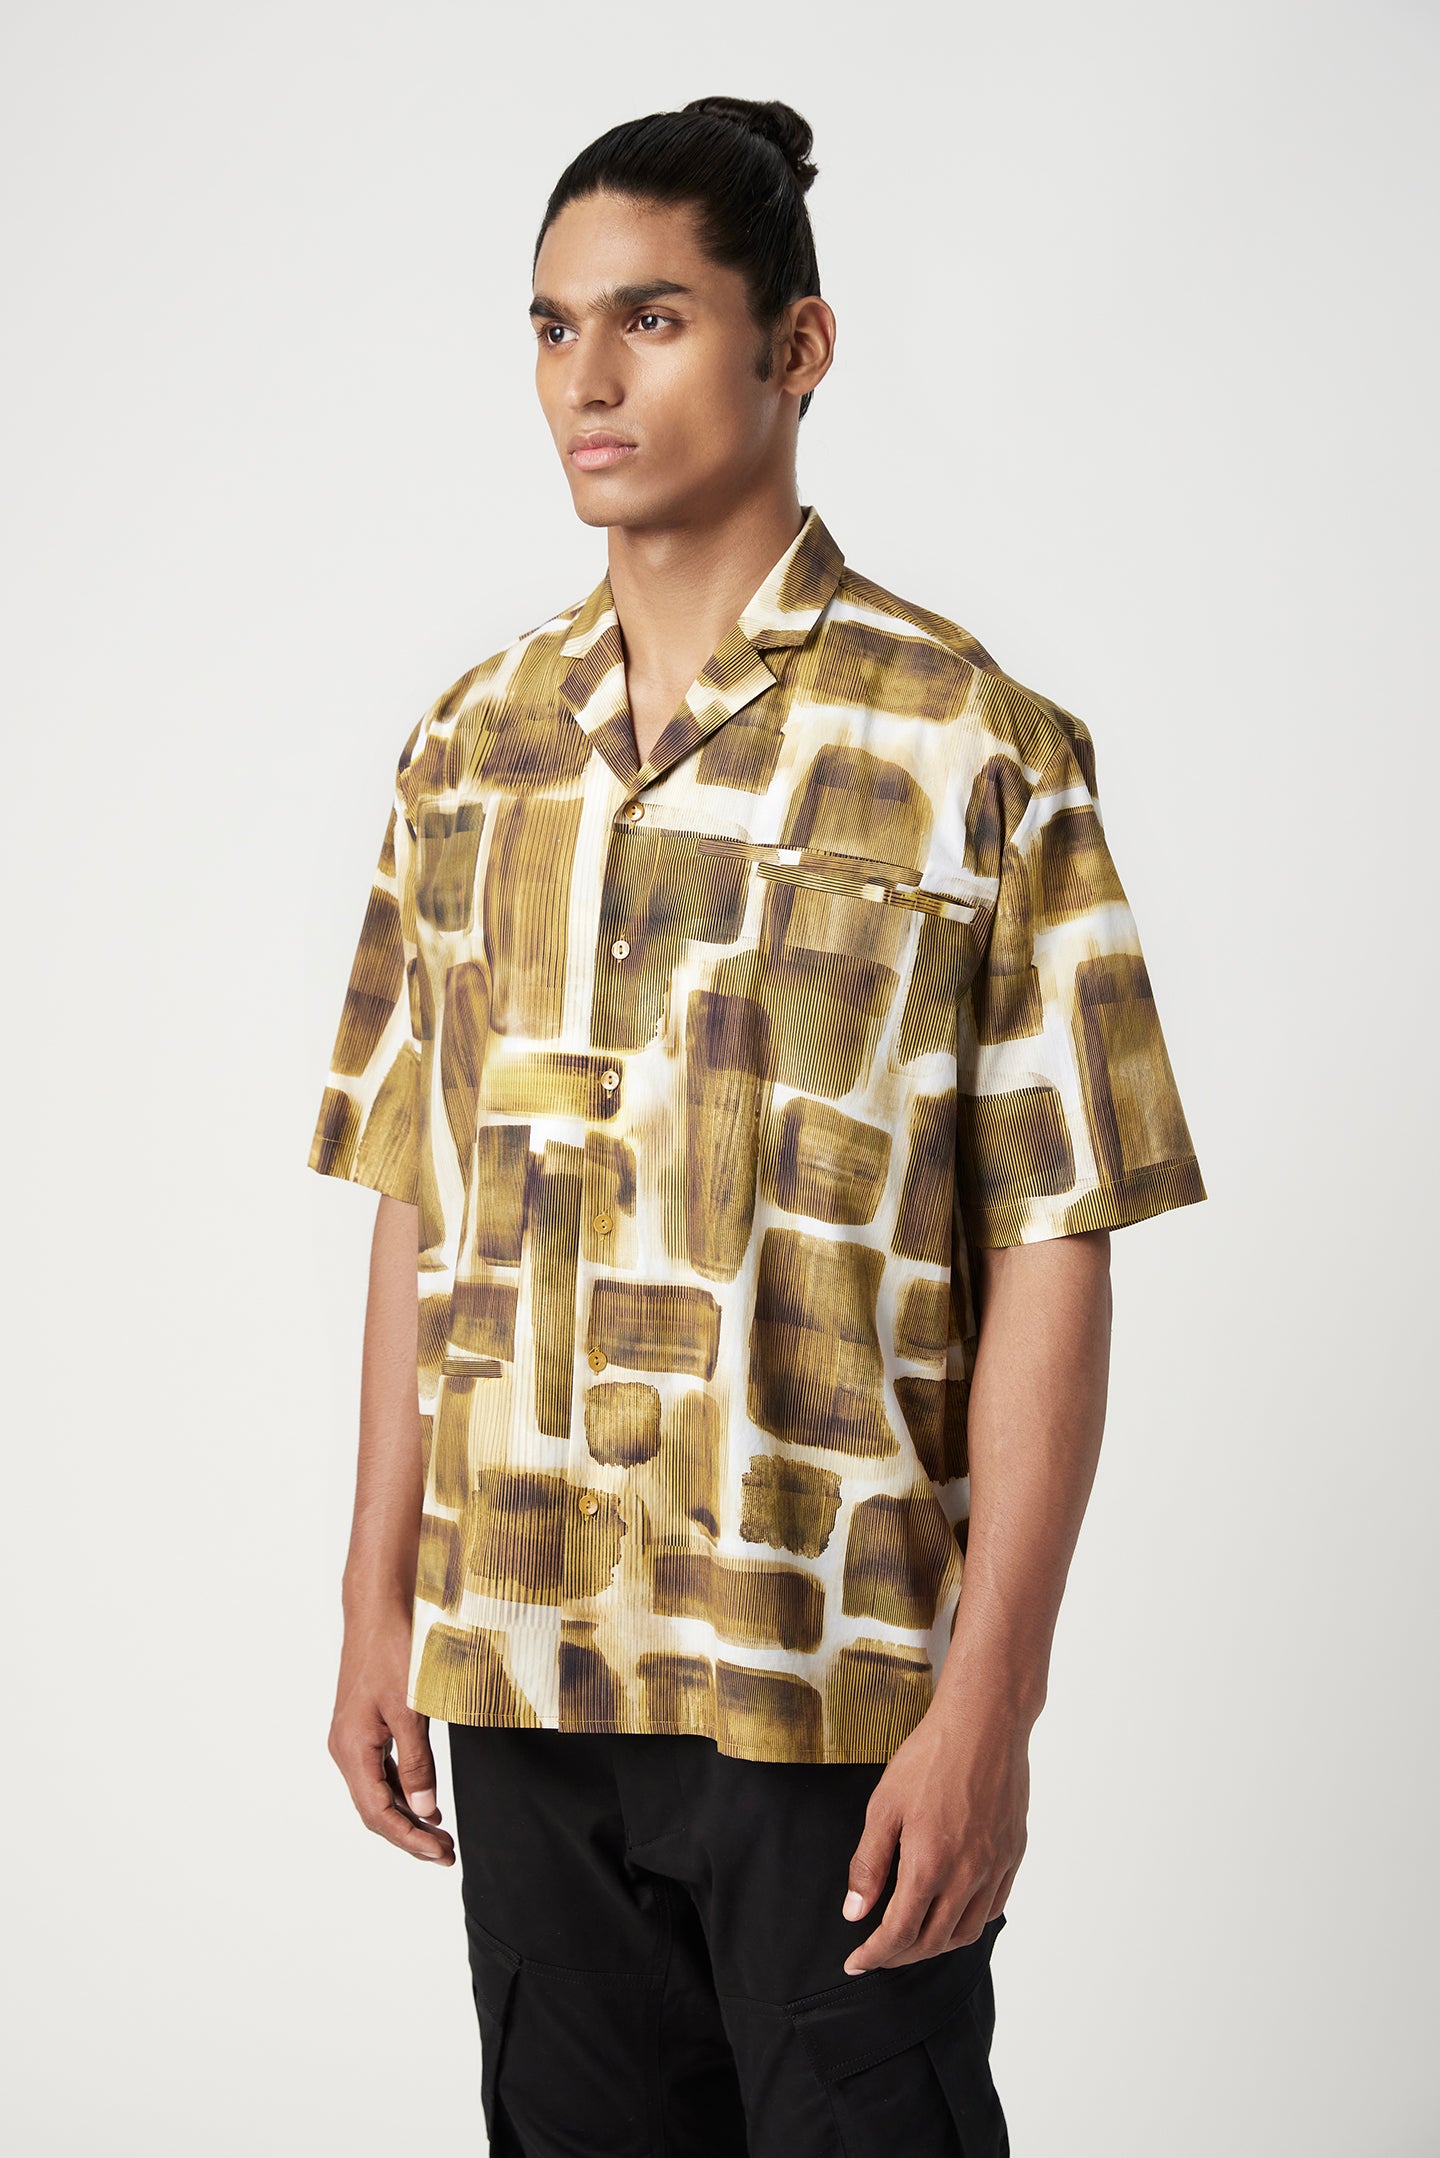 Easy Fit Half Sleeve Collar Shirt in an All-Over Abstract Check Print